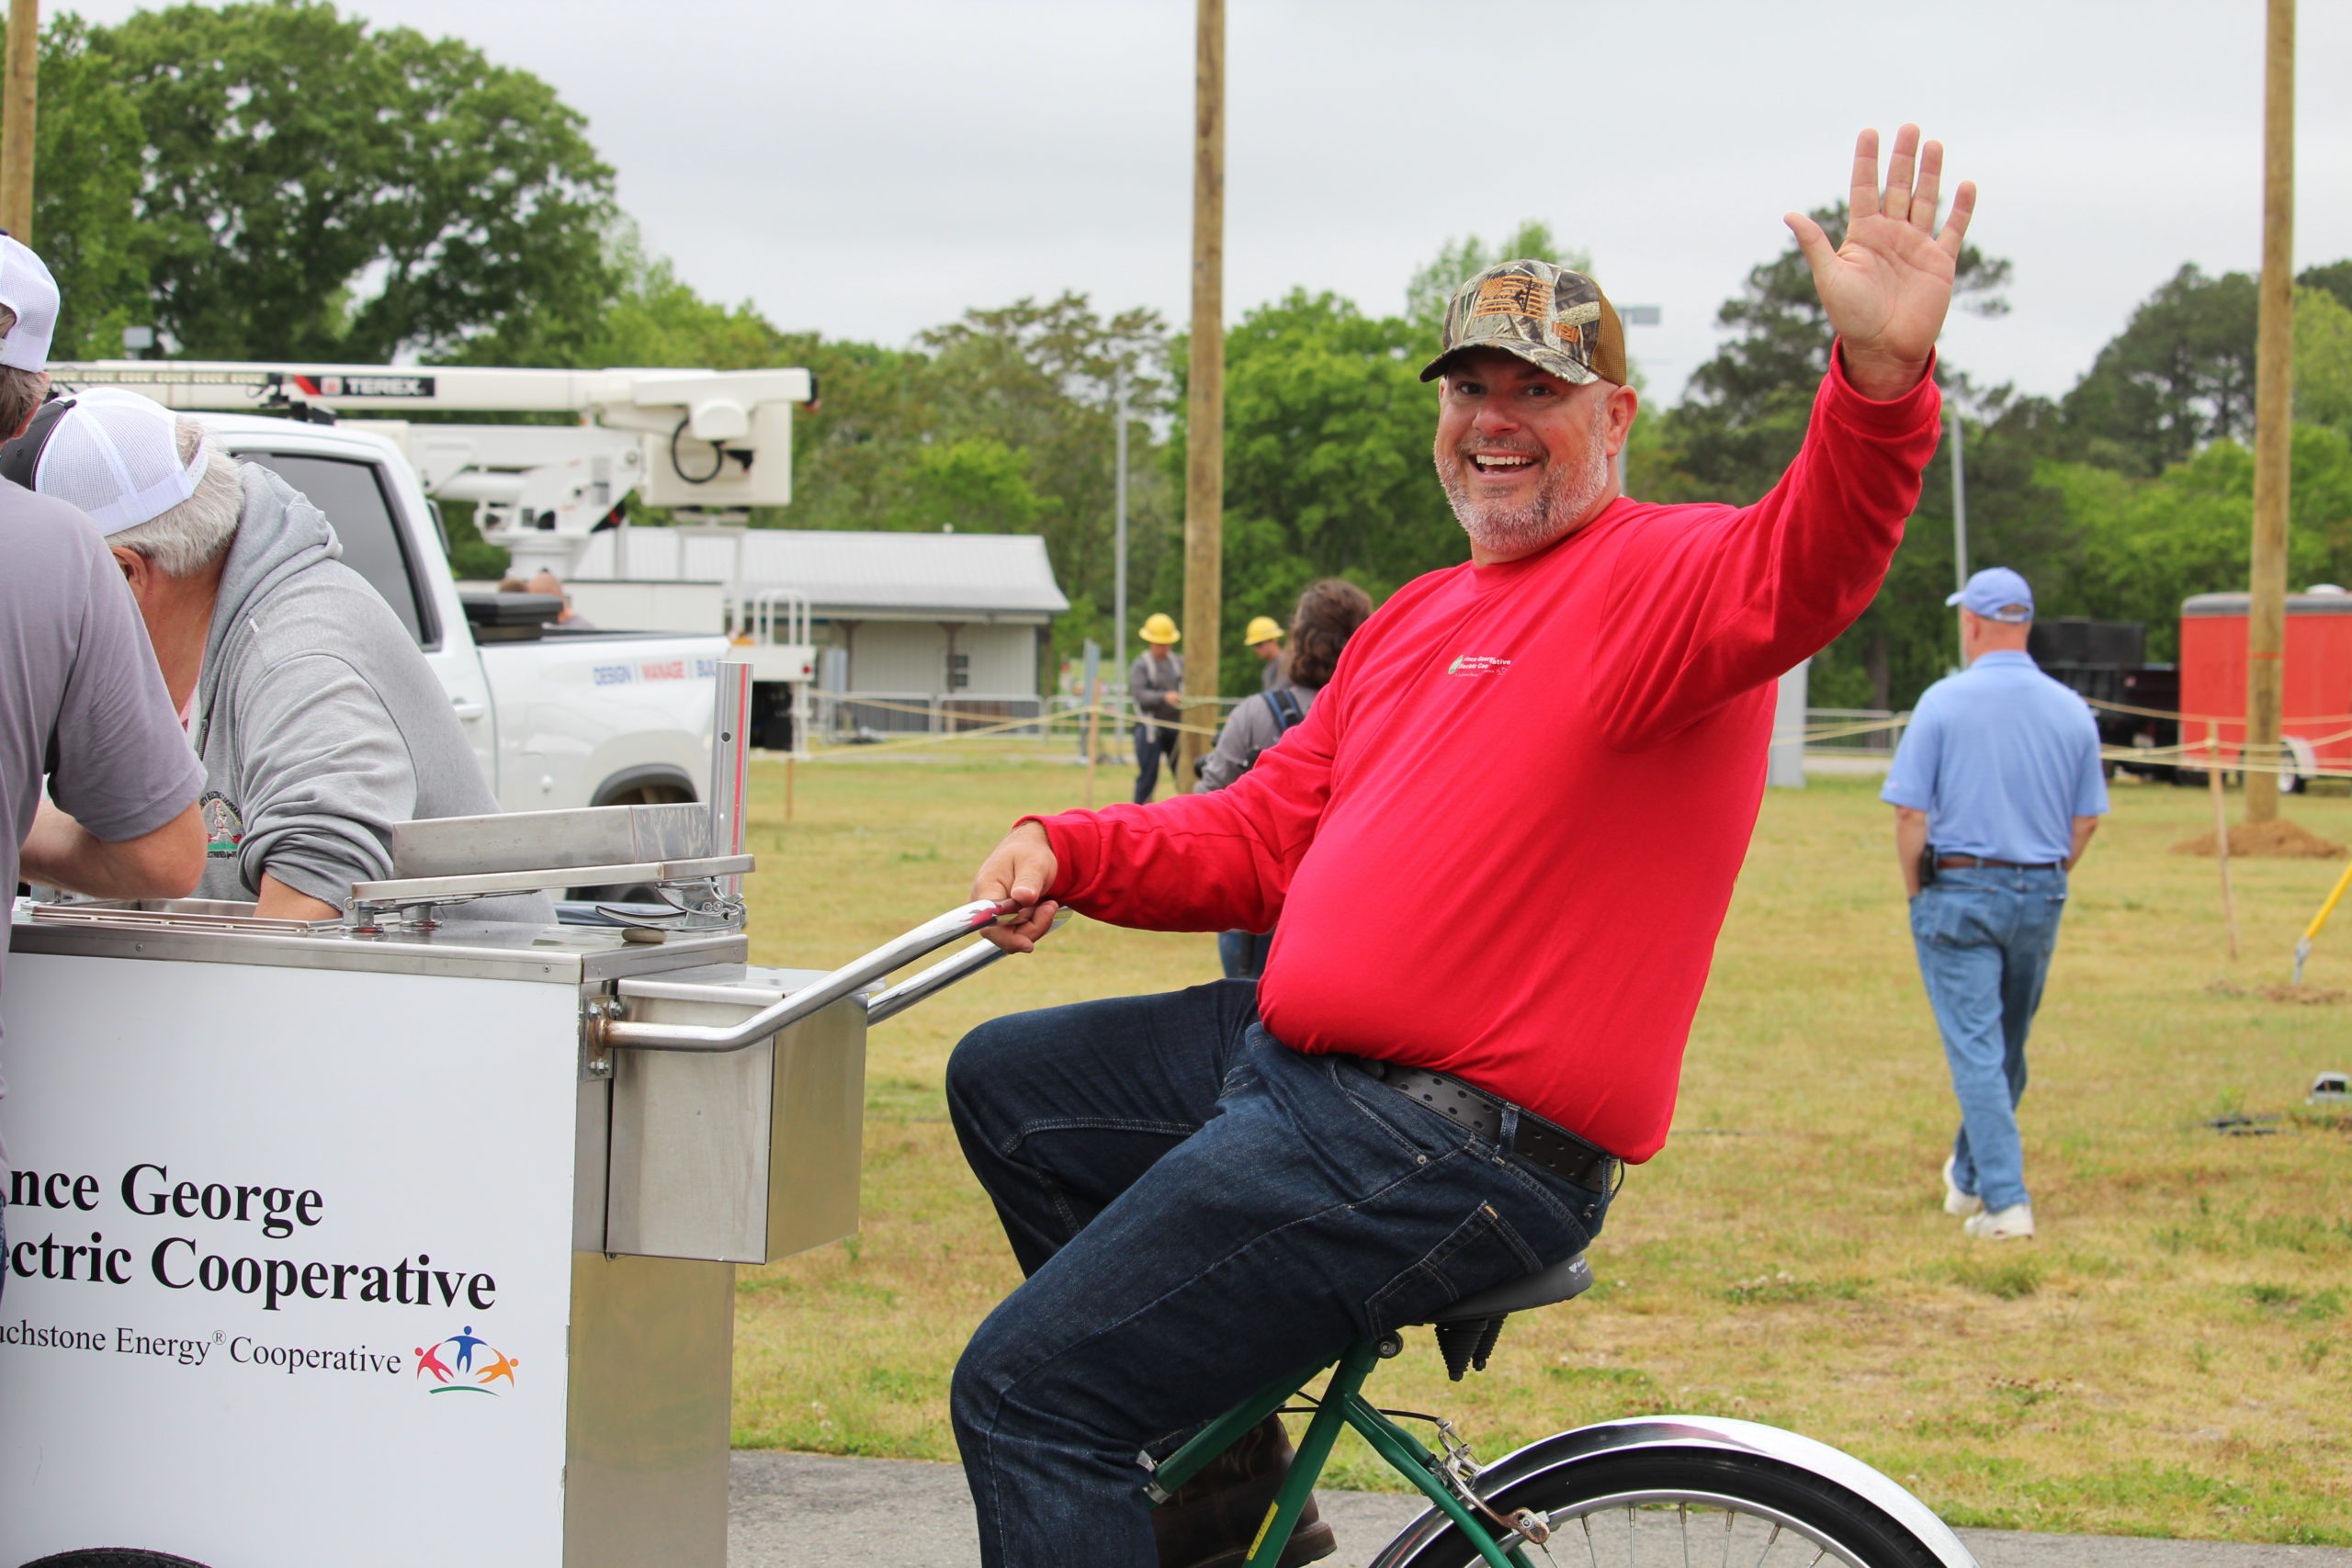 Casey Logan, President & CEO of Prince George Electric Cooperative, greets everyone as he cruises through the Gaff-n-Go Lineworker’s Rodeo on the PGEC icecream bike offering up sweet treats.